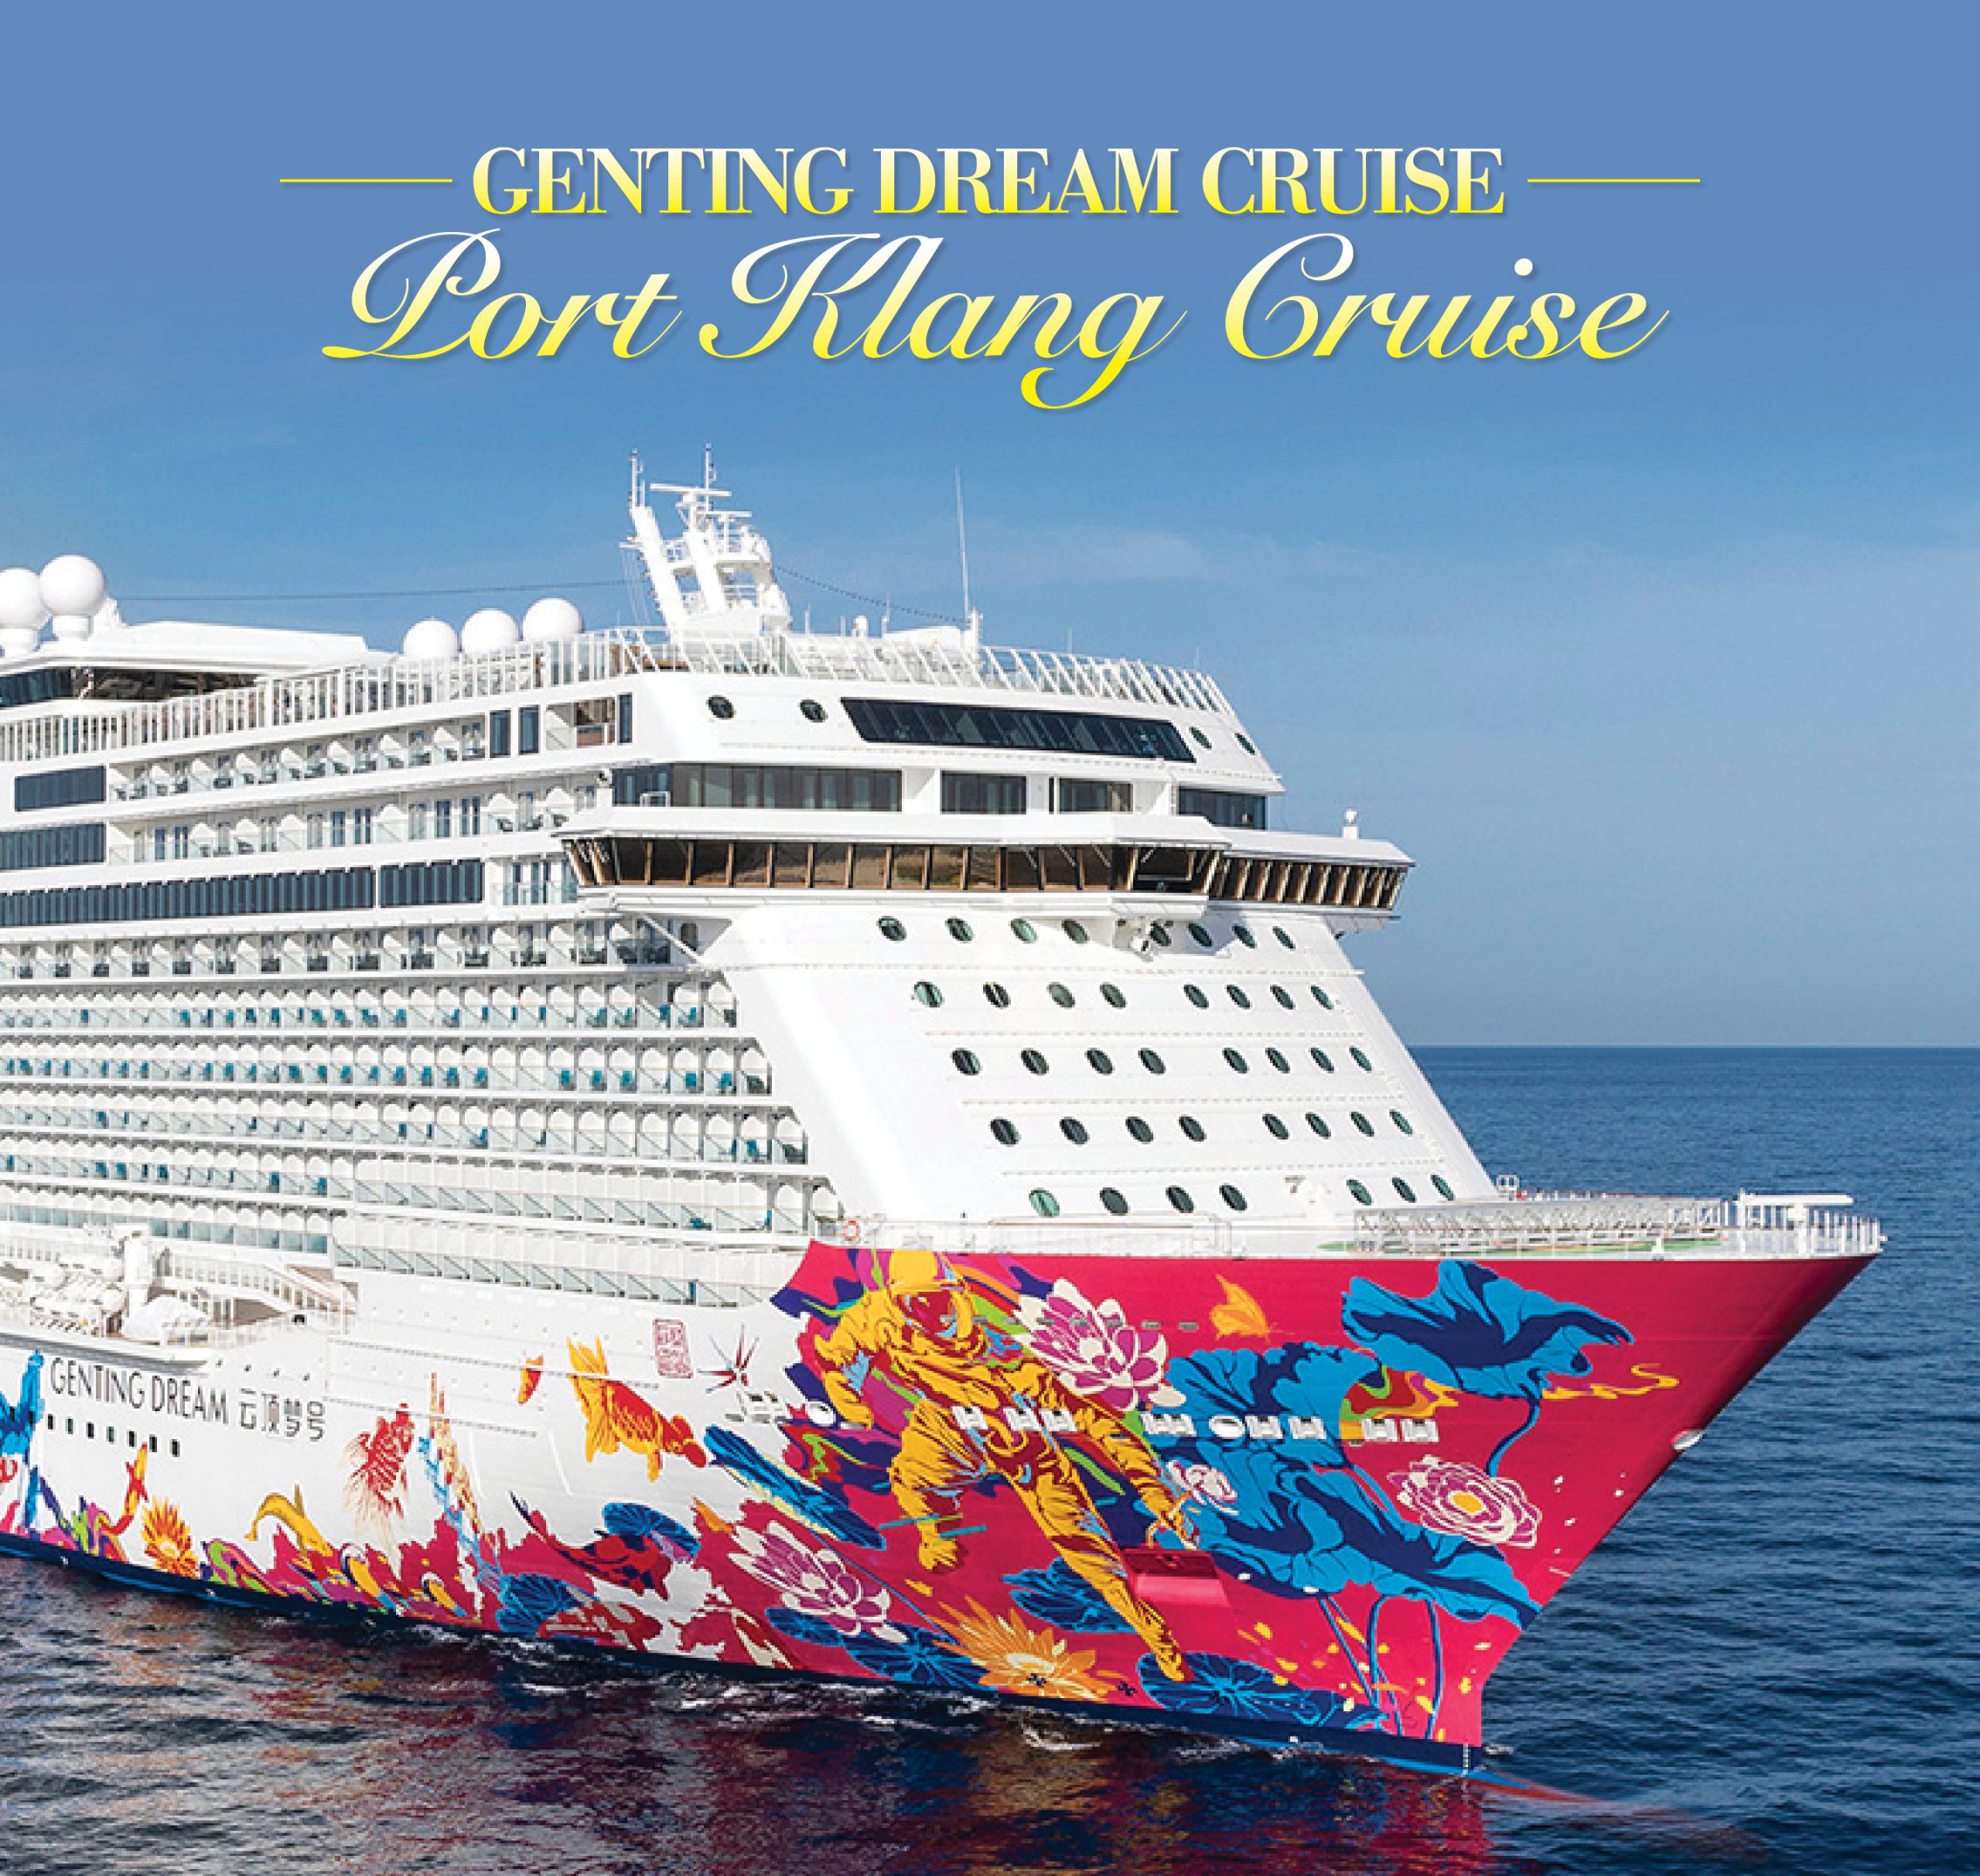 2 Nights Cruise, Port Klang Cruise Great India Tour Company